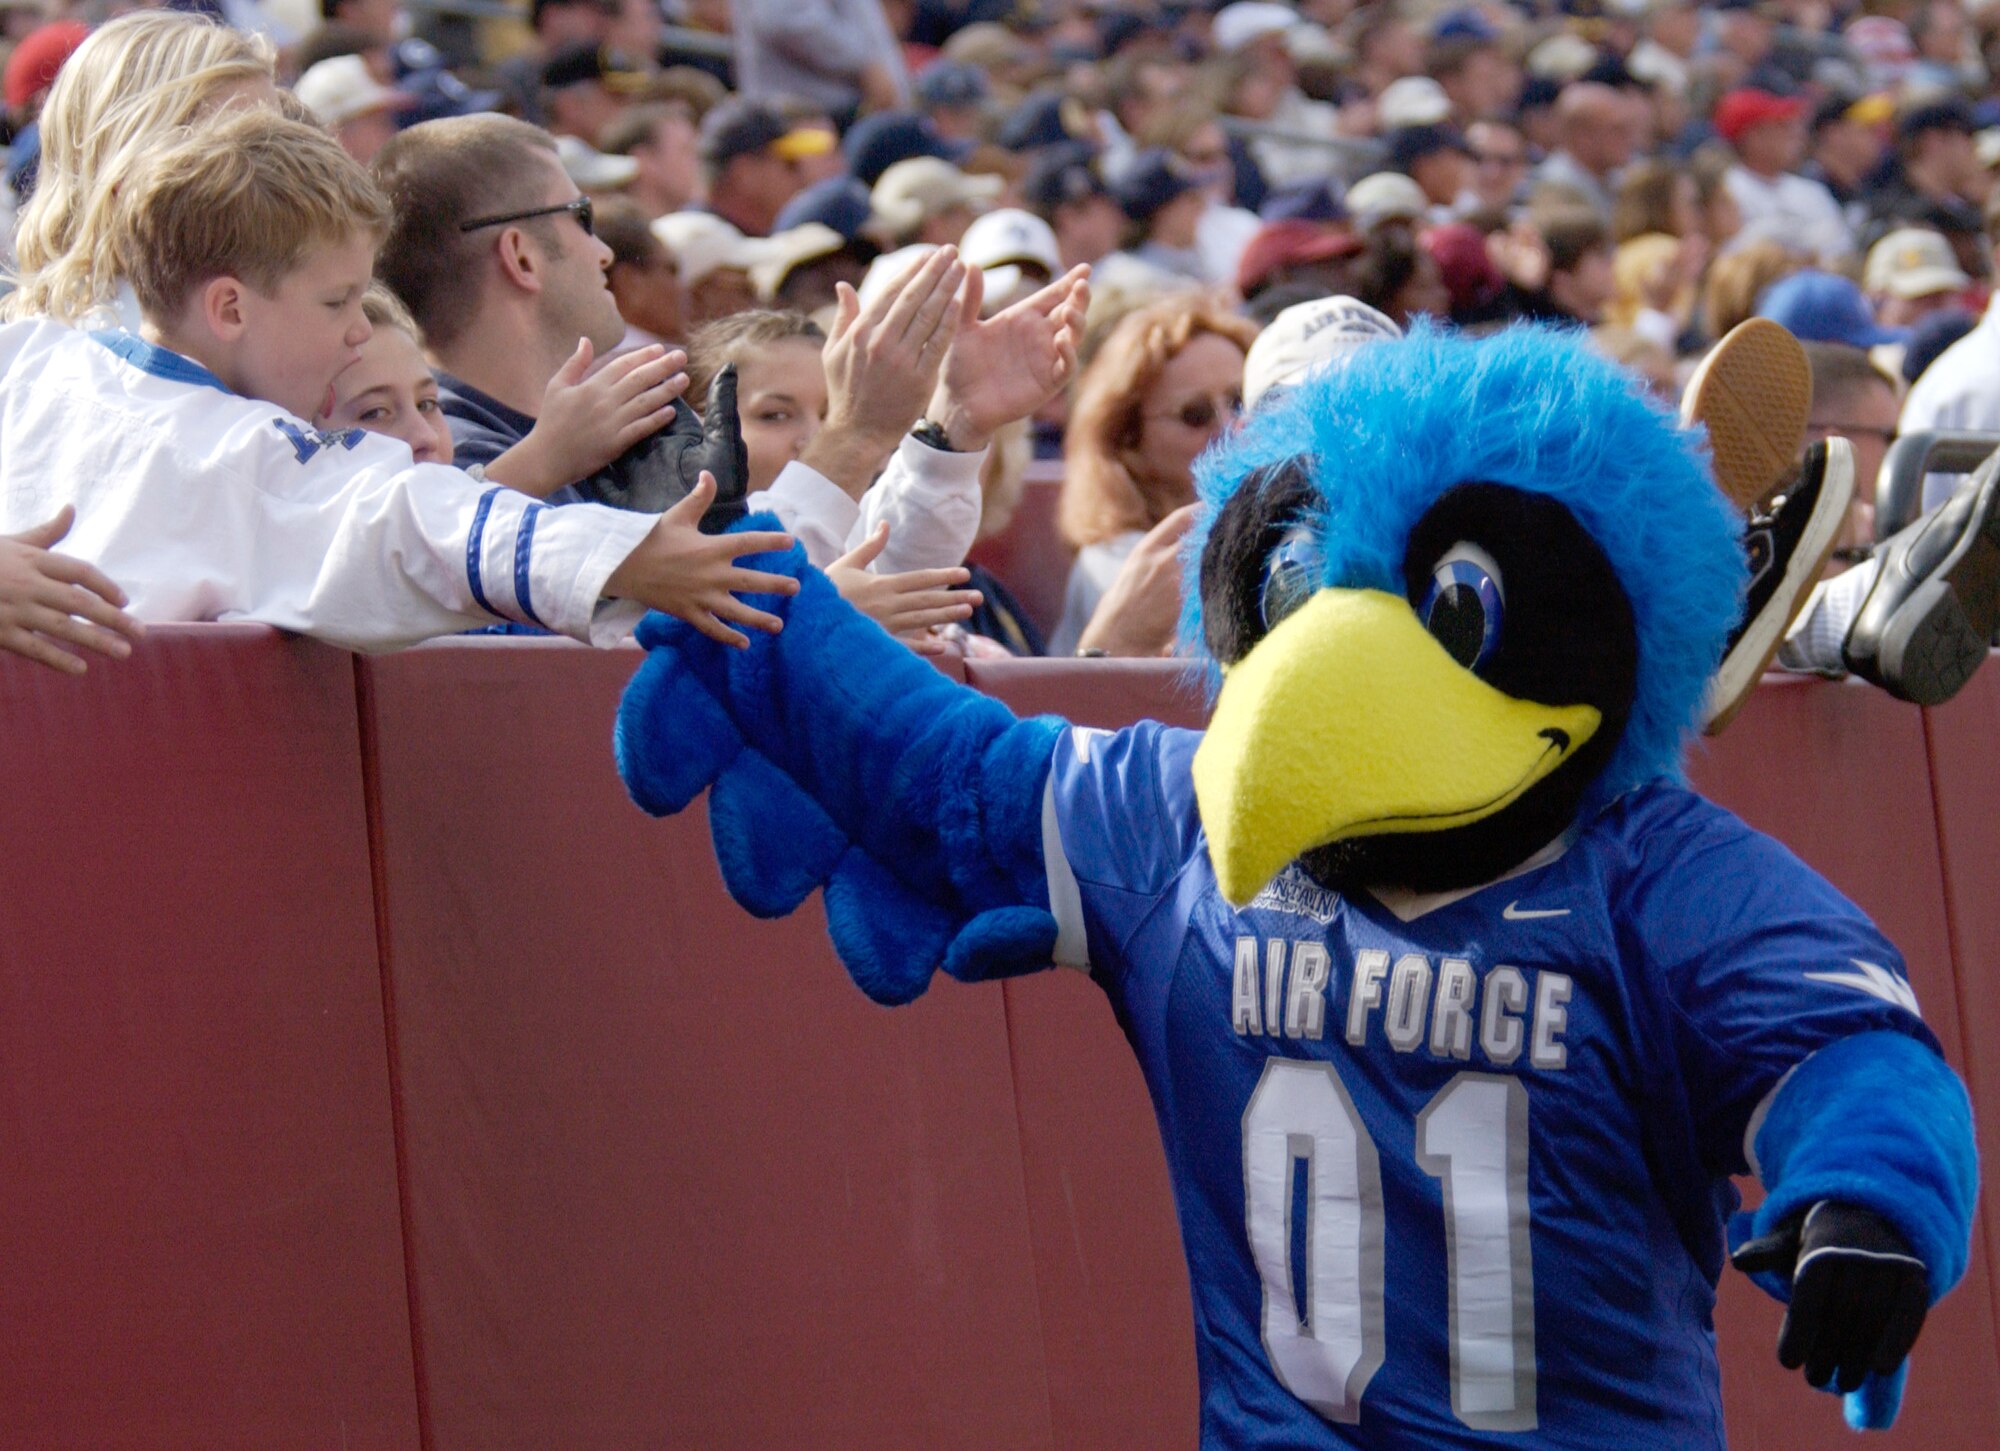 LANDOVER, Md. -- The U.S. Air Force Academy's mascot, "The Bird," greets a few of the 30,000-plus fans on hand as the Air Force Falcons take on the U.S. Naval Academy squad at FedEx Field here Oct. 4.  Despite some promising early success, the Air Force Falcon's fell to the Navy Midshipmen 28-25.  (U.S. Air Force photo by Master Sgt. Jim Varhegyi)